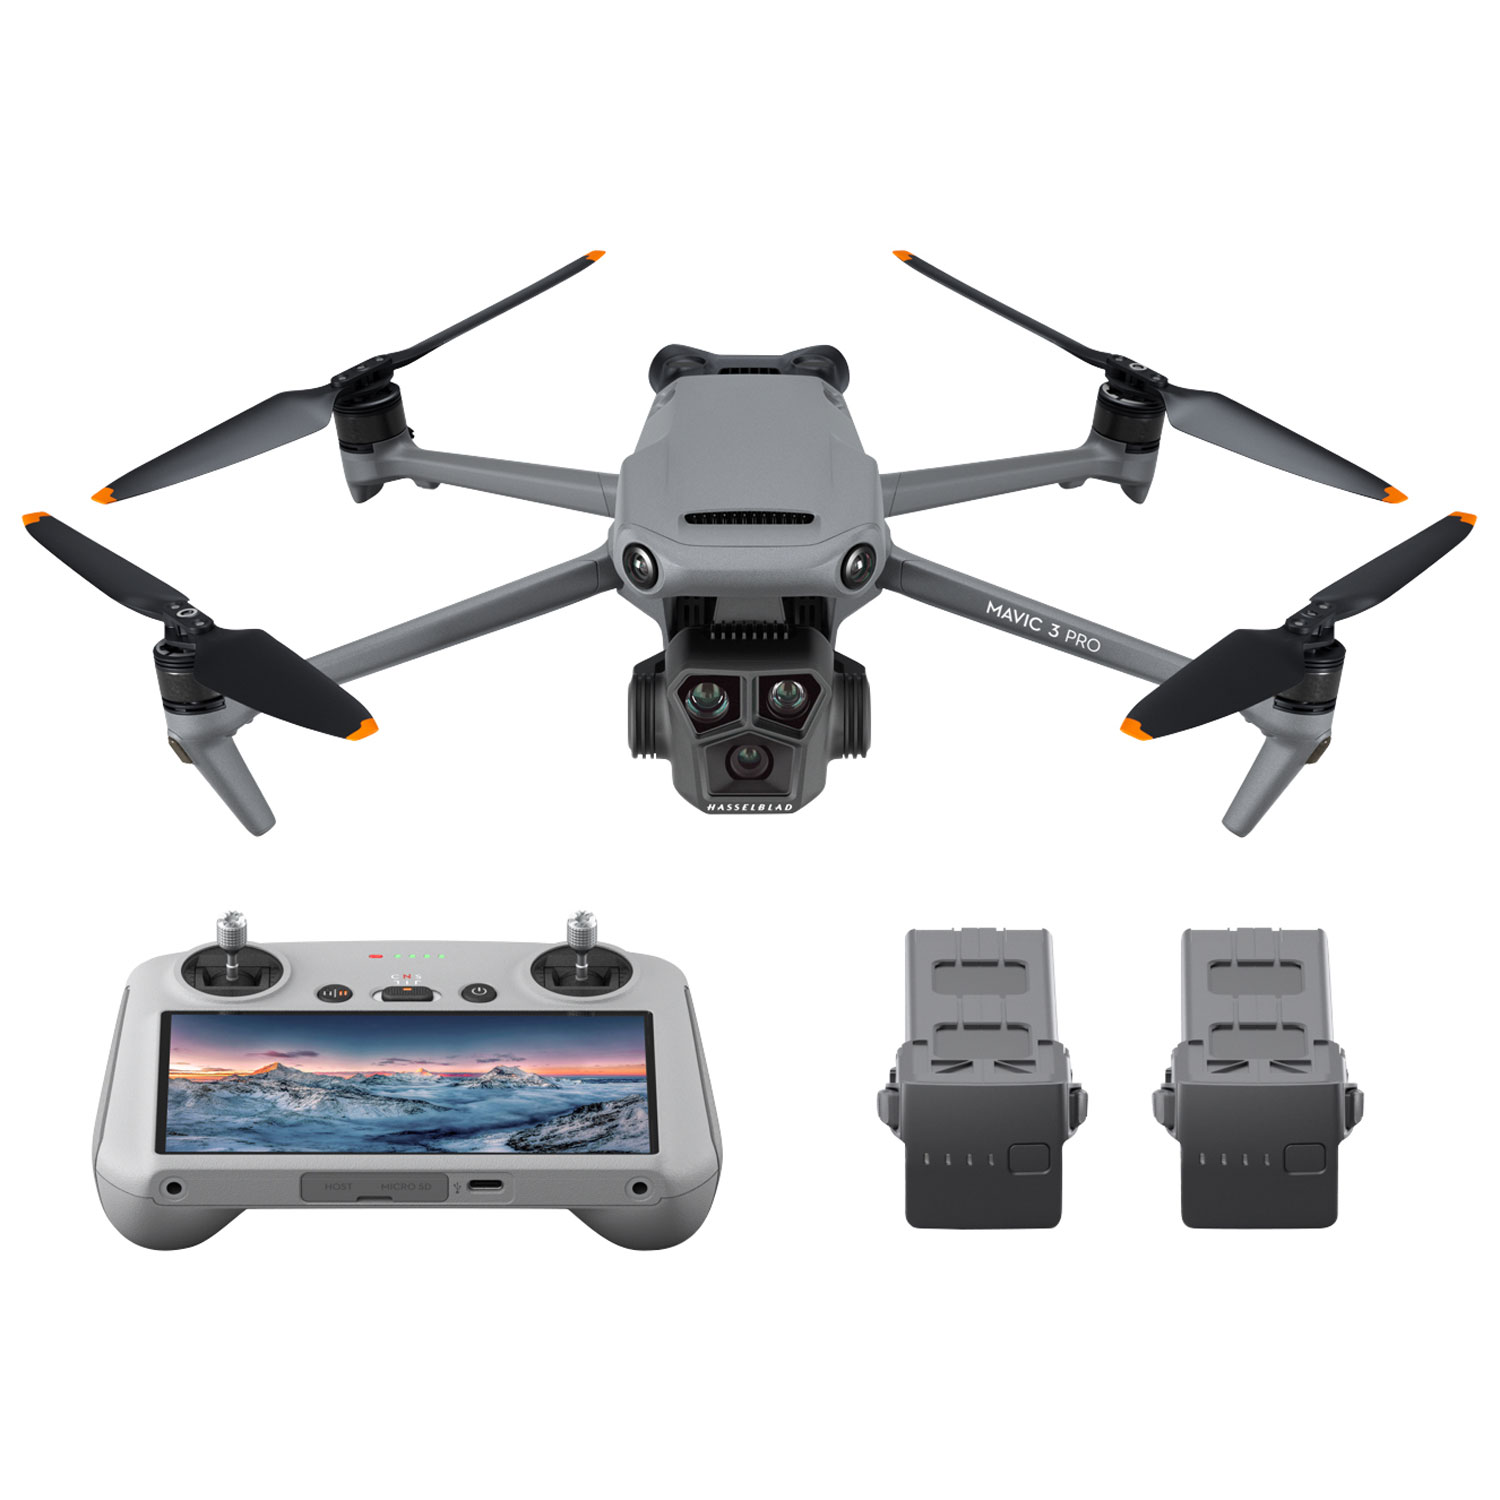 DJI Mavic 3 Pro Fly More Combo Drone and Remote Control with Built-in Screen (DJI RC) - Gray